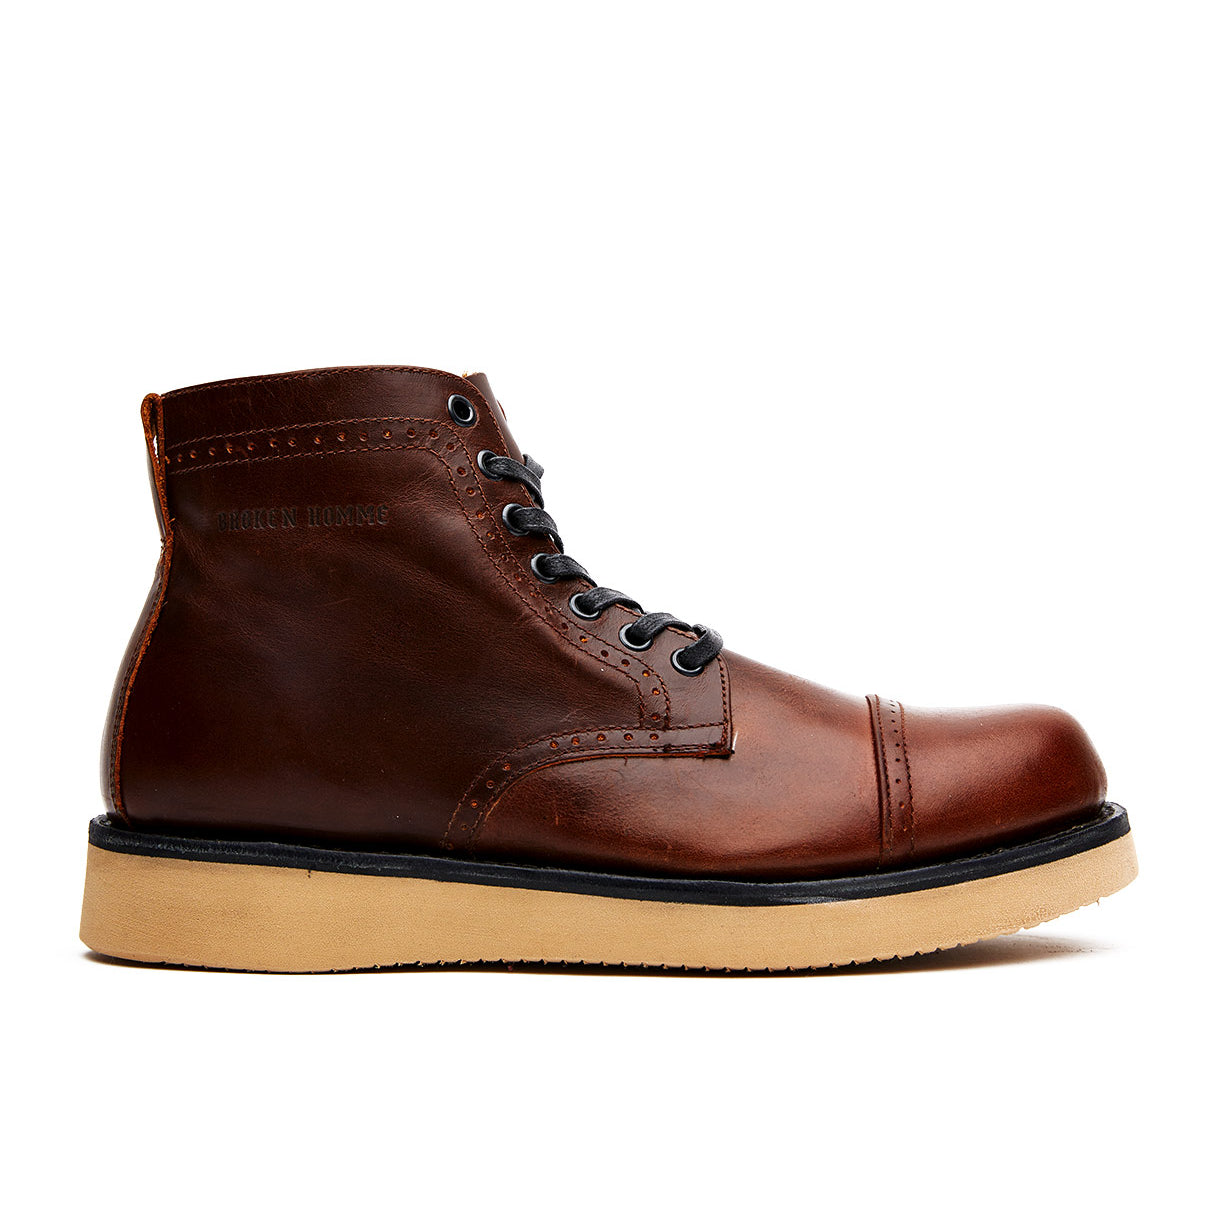 The Broken Homme Shaun boot, featuring a leather upper and rubber sole.